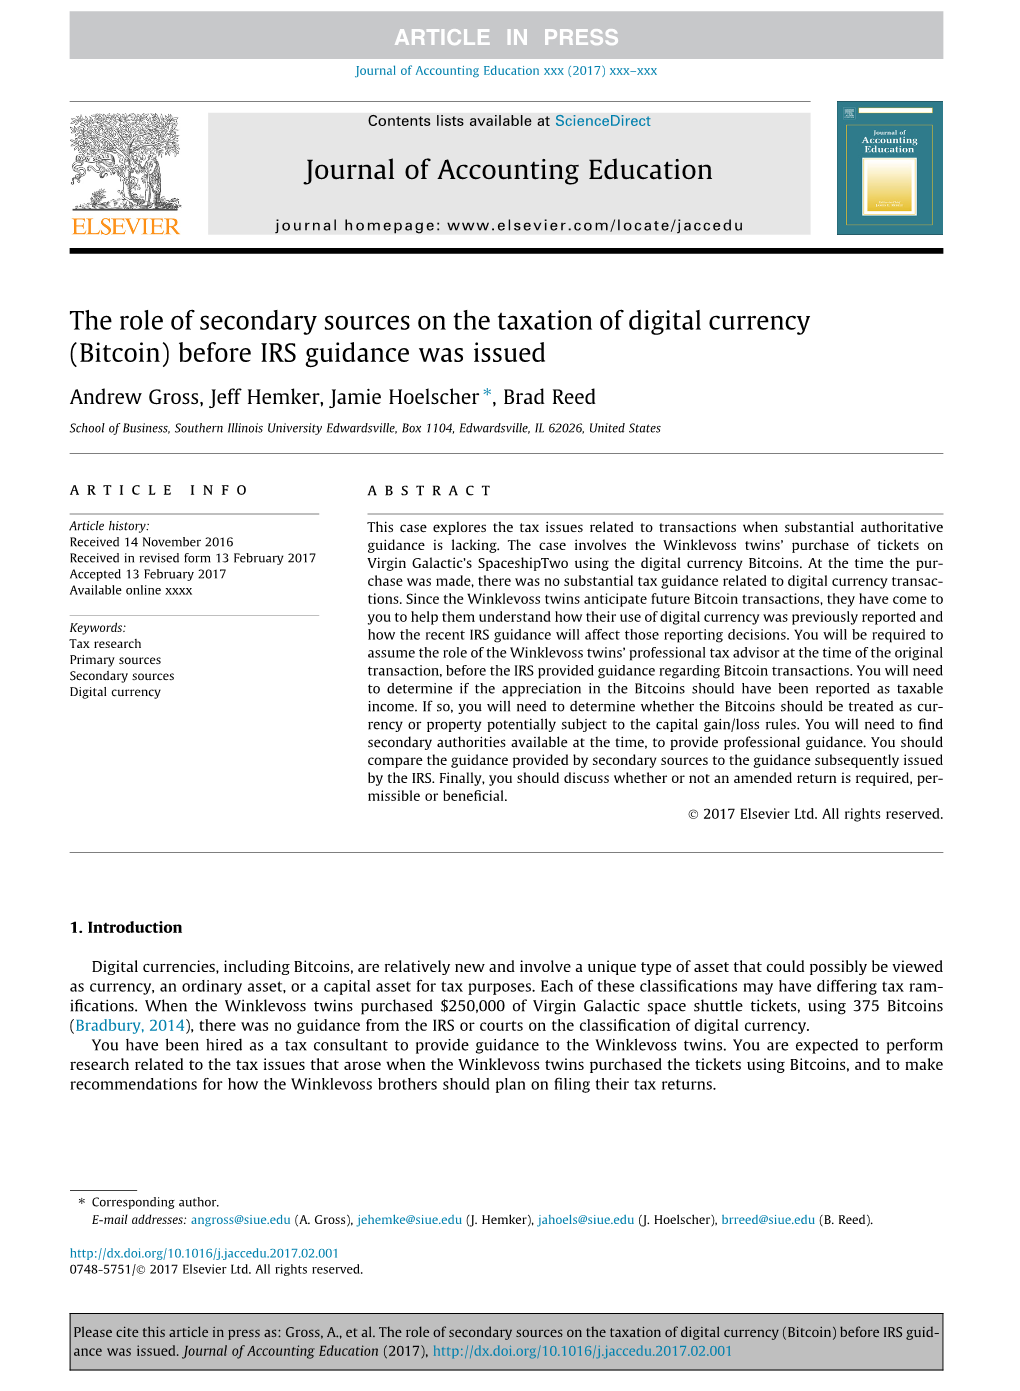 The Role of Secondary Sources on the Taxation of Digital Currency (Bitcoin) Before IRS Guidance Was Issued ⇑ Andrew Gross, Jeff Hemker, Jamie Hoelscher , Brad Reed